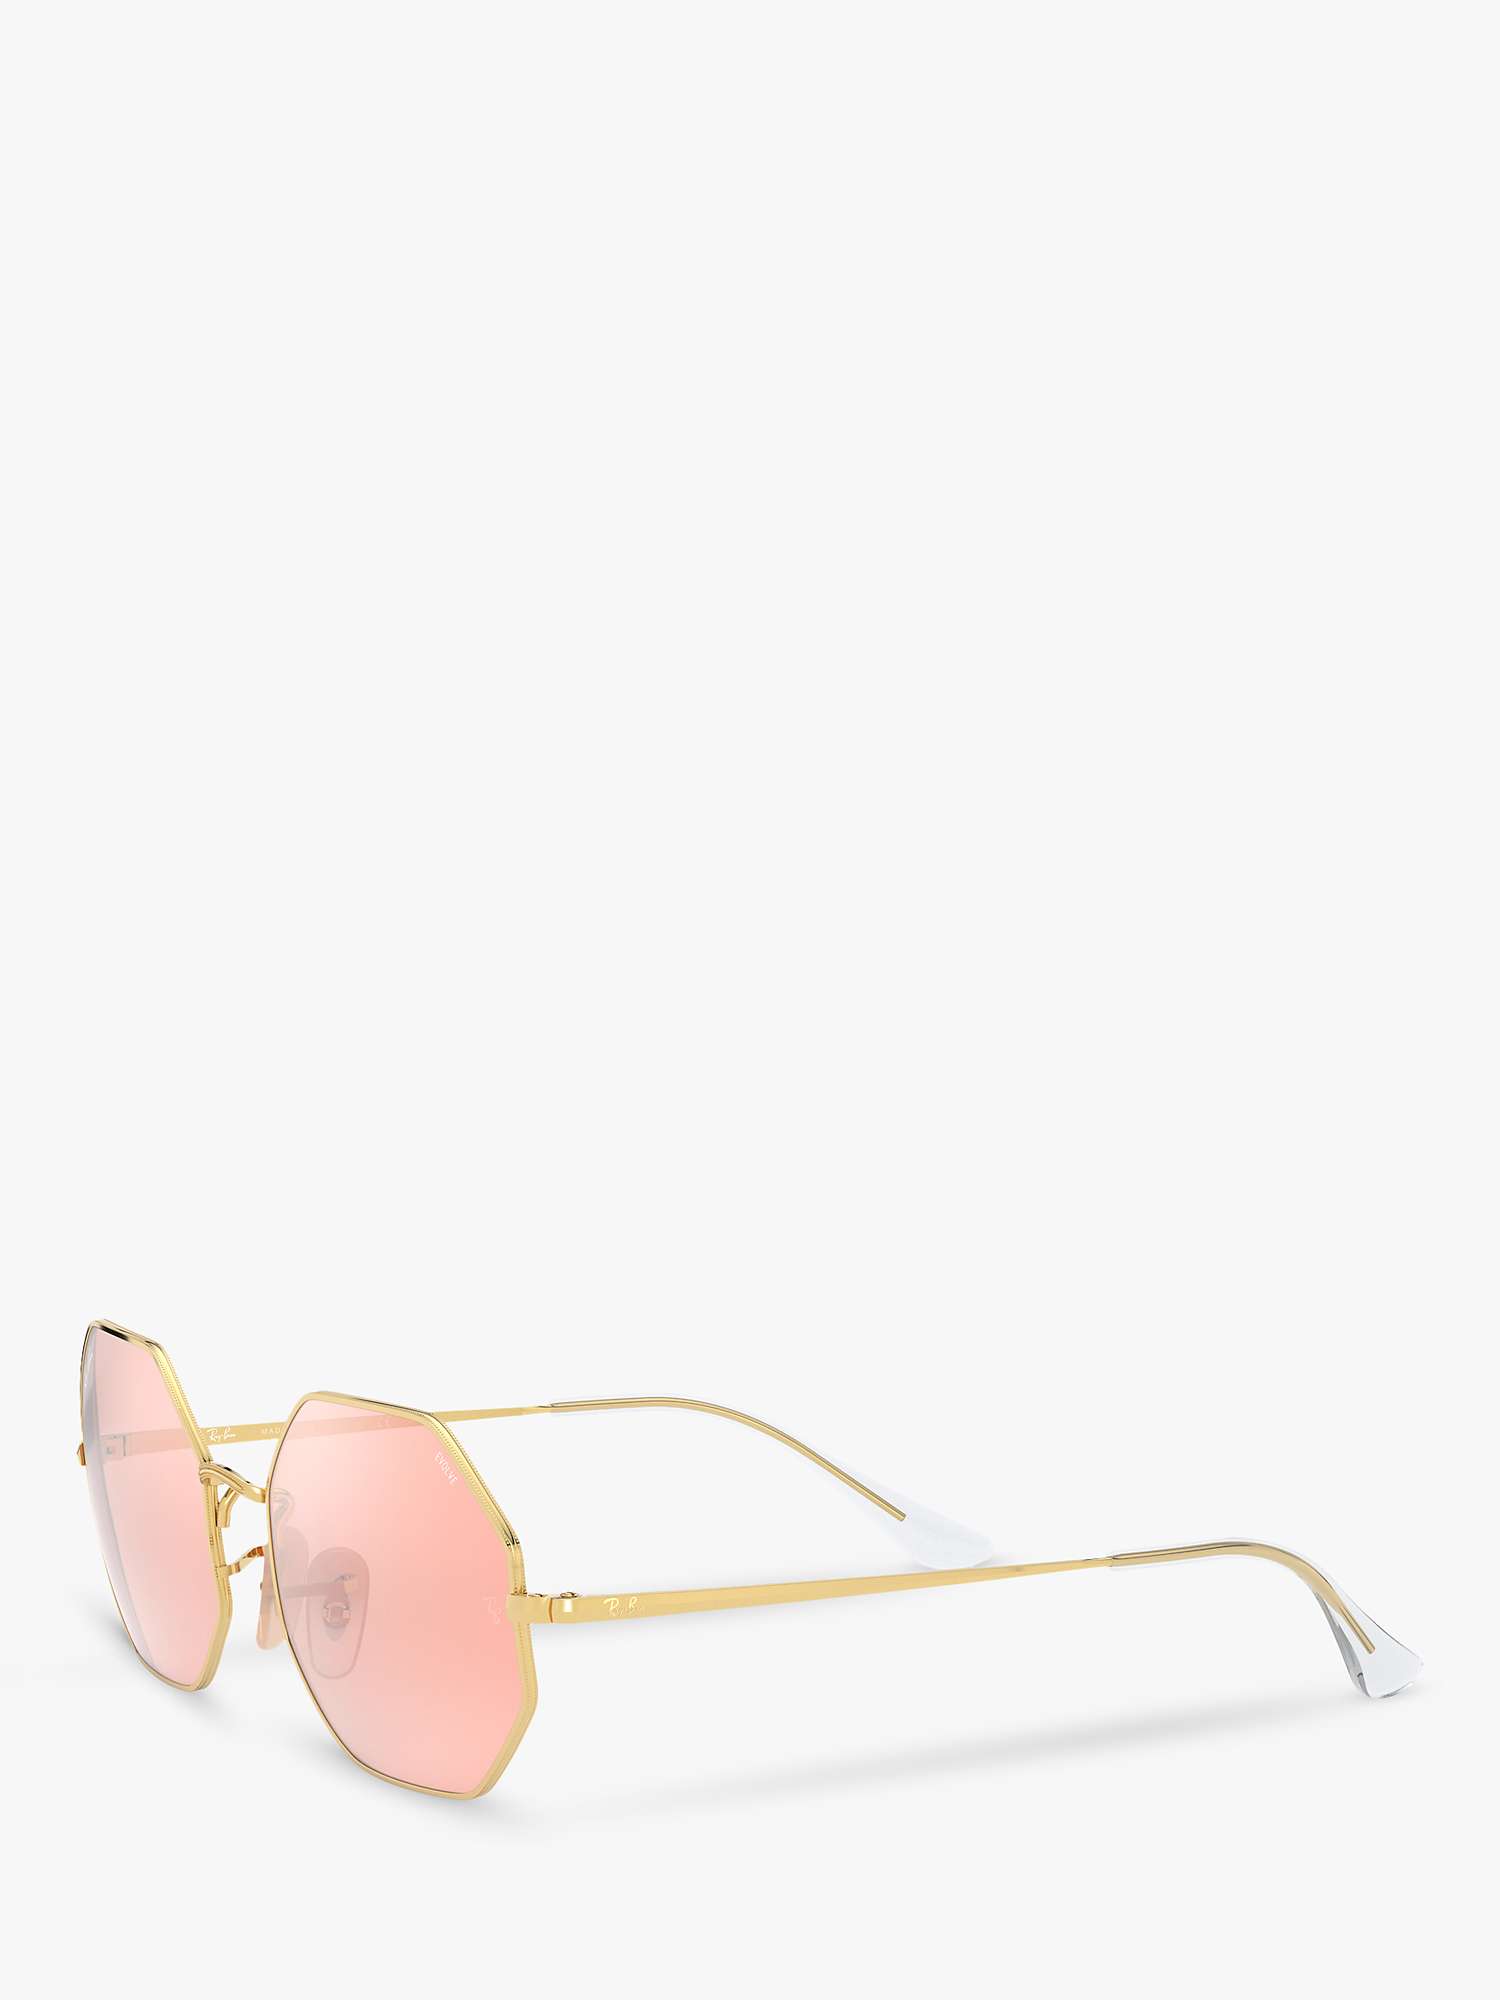 Buy Ray-Ban RB1972 Unisex Octagonal Sunglasses Online at johnlewis.com